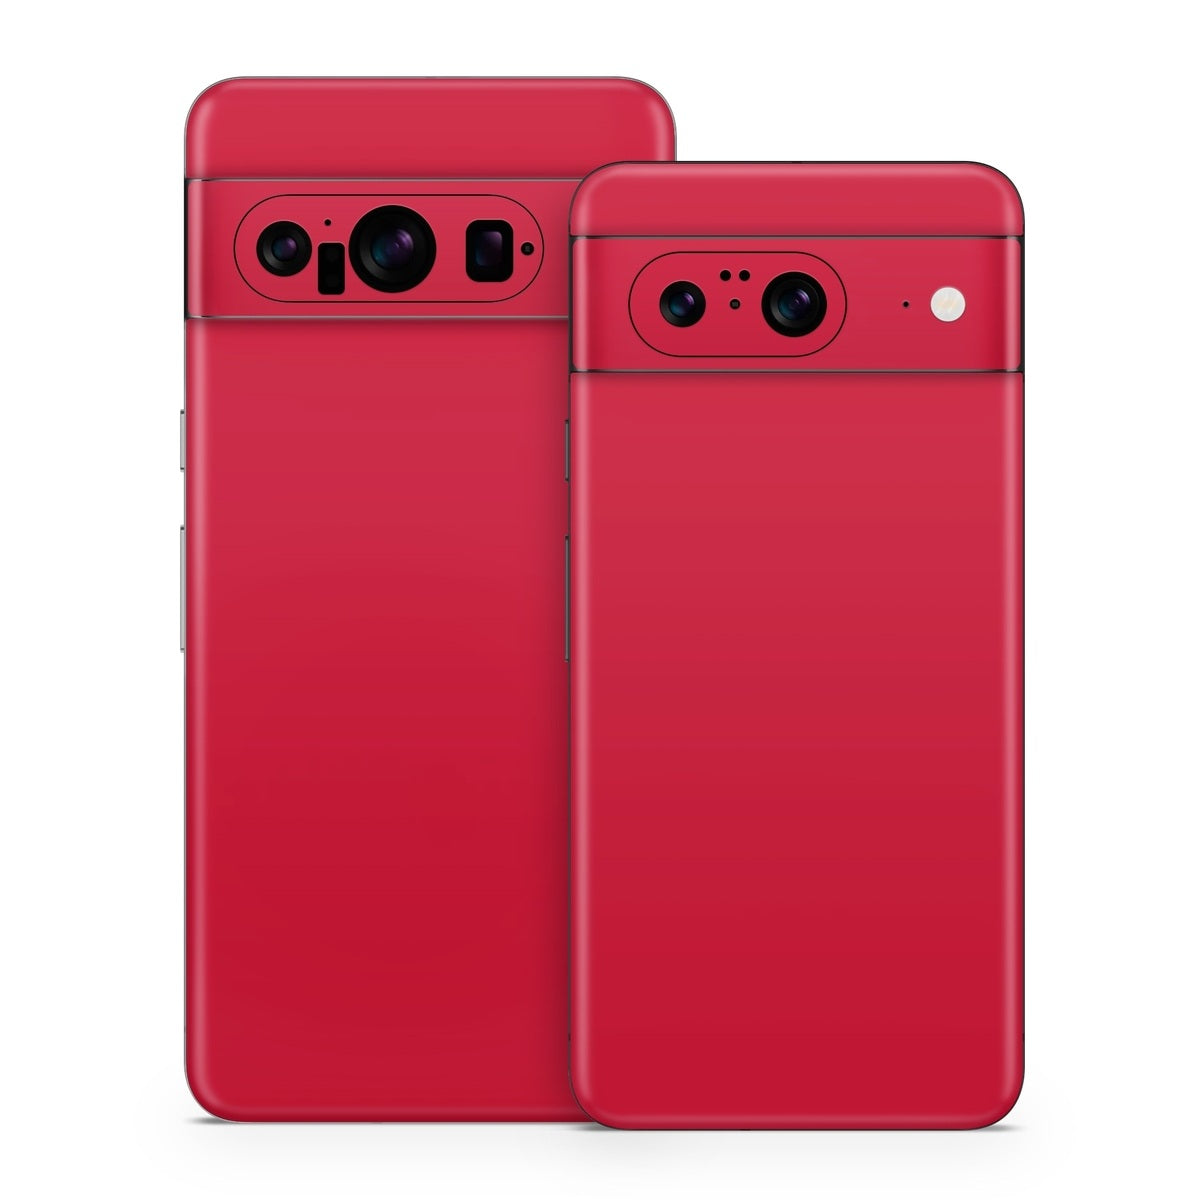 Solid State Red - Google Pixel 8 Skin